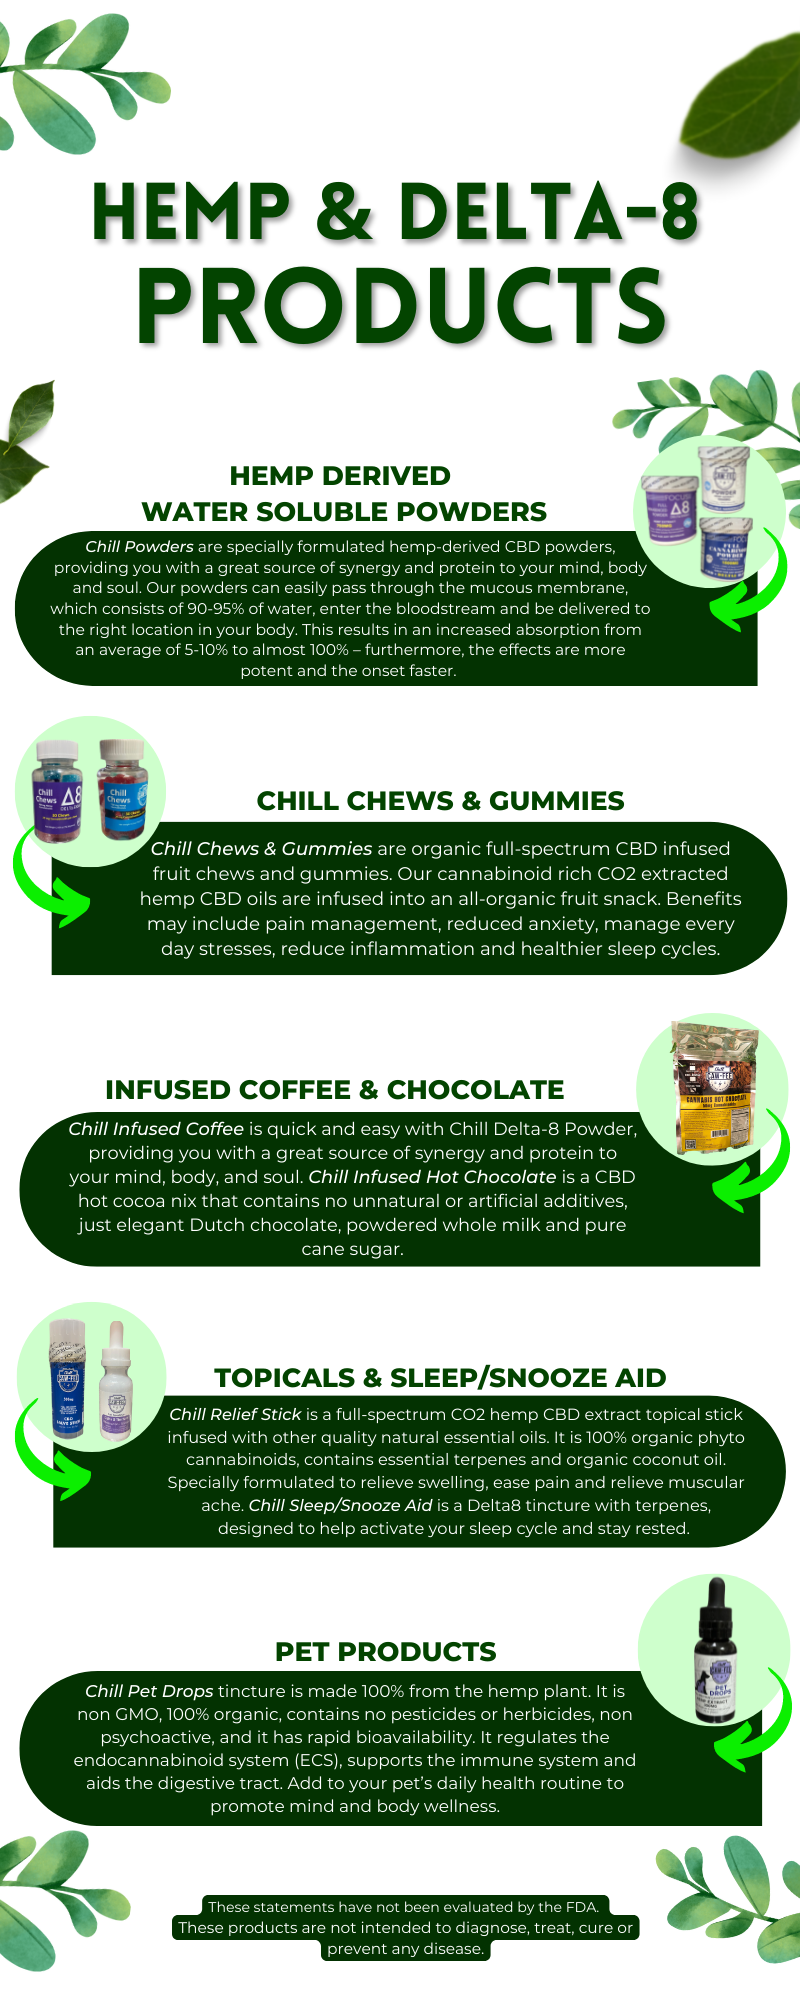 Chill Facts – Chill Cawfee